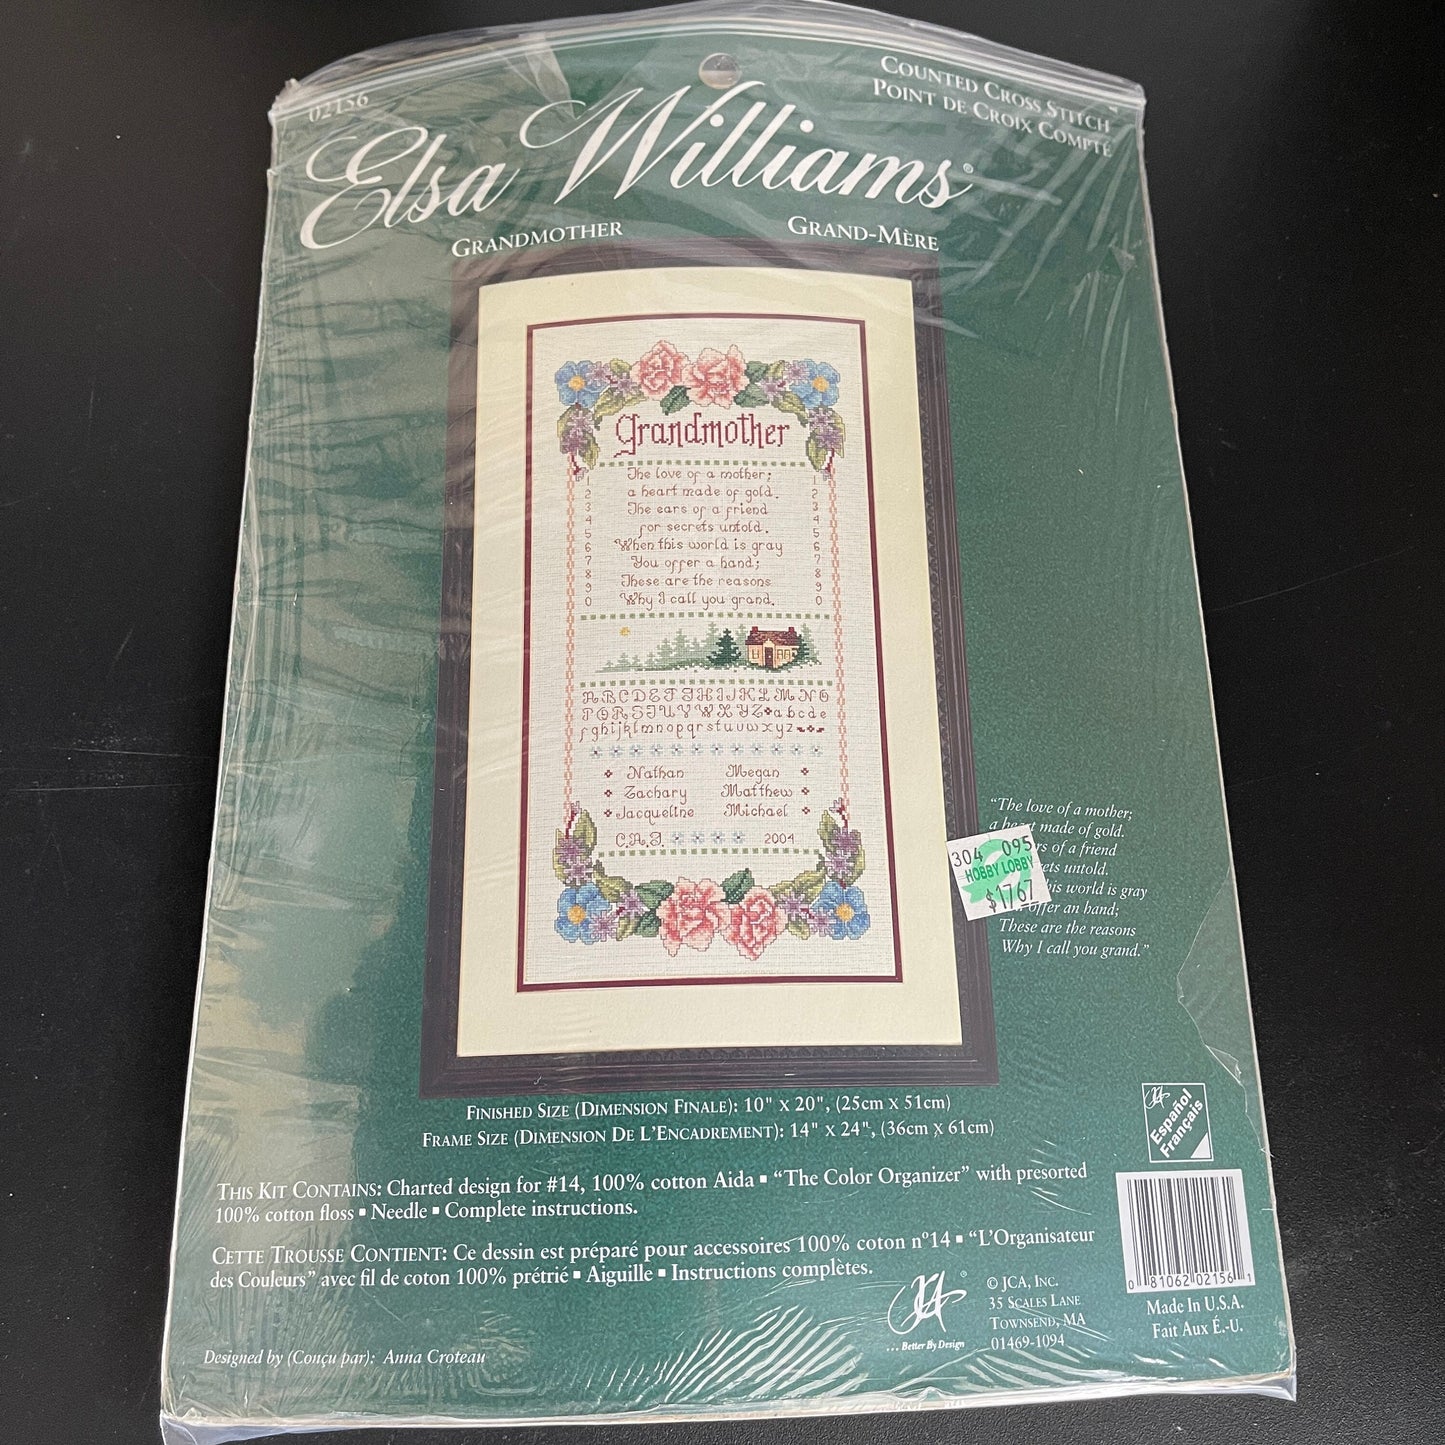 Elsa Williams Grandmother Counted Cross Stitch Kit 14 Count Ivory AIDA